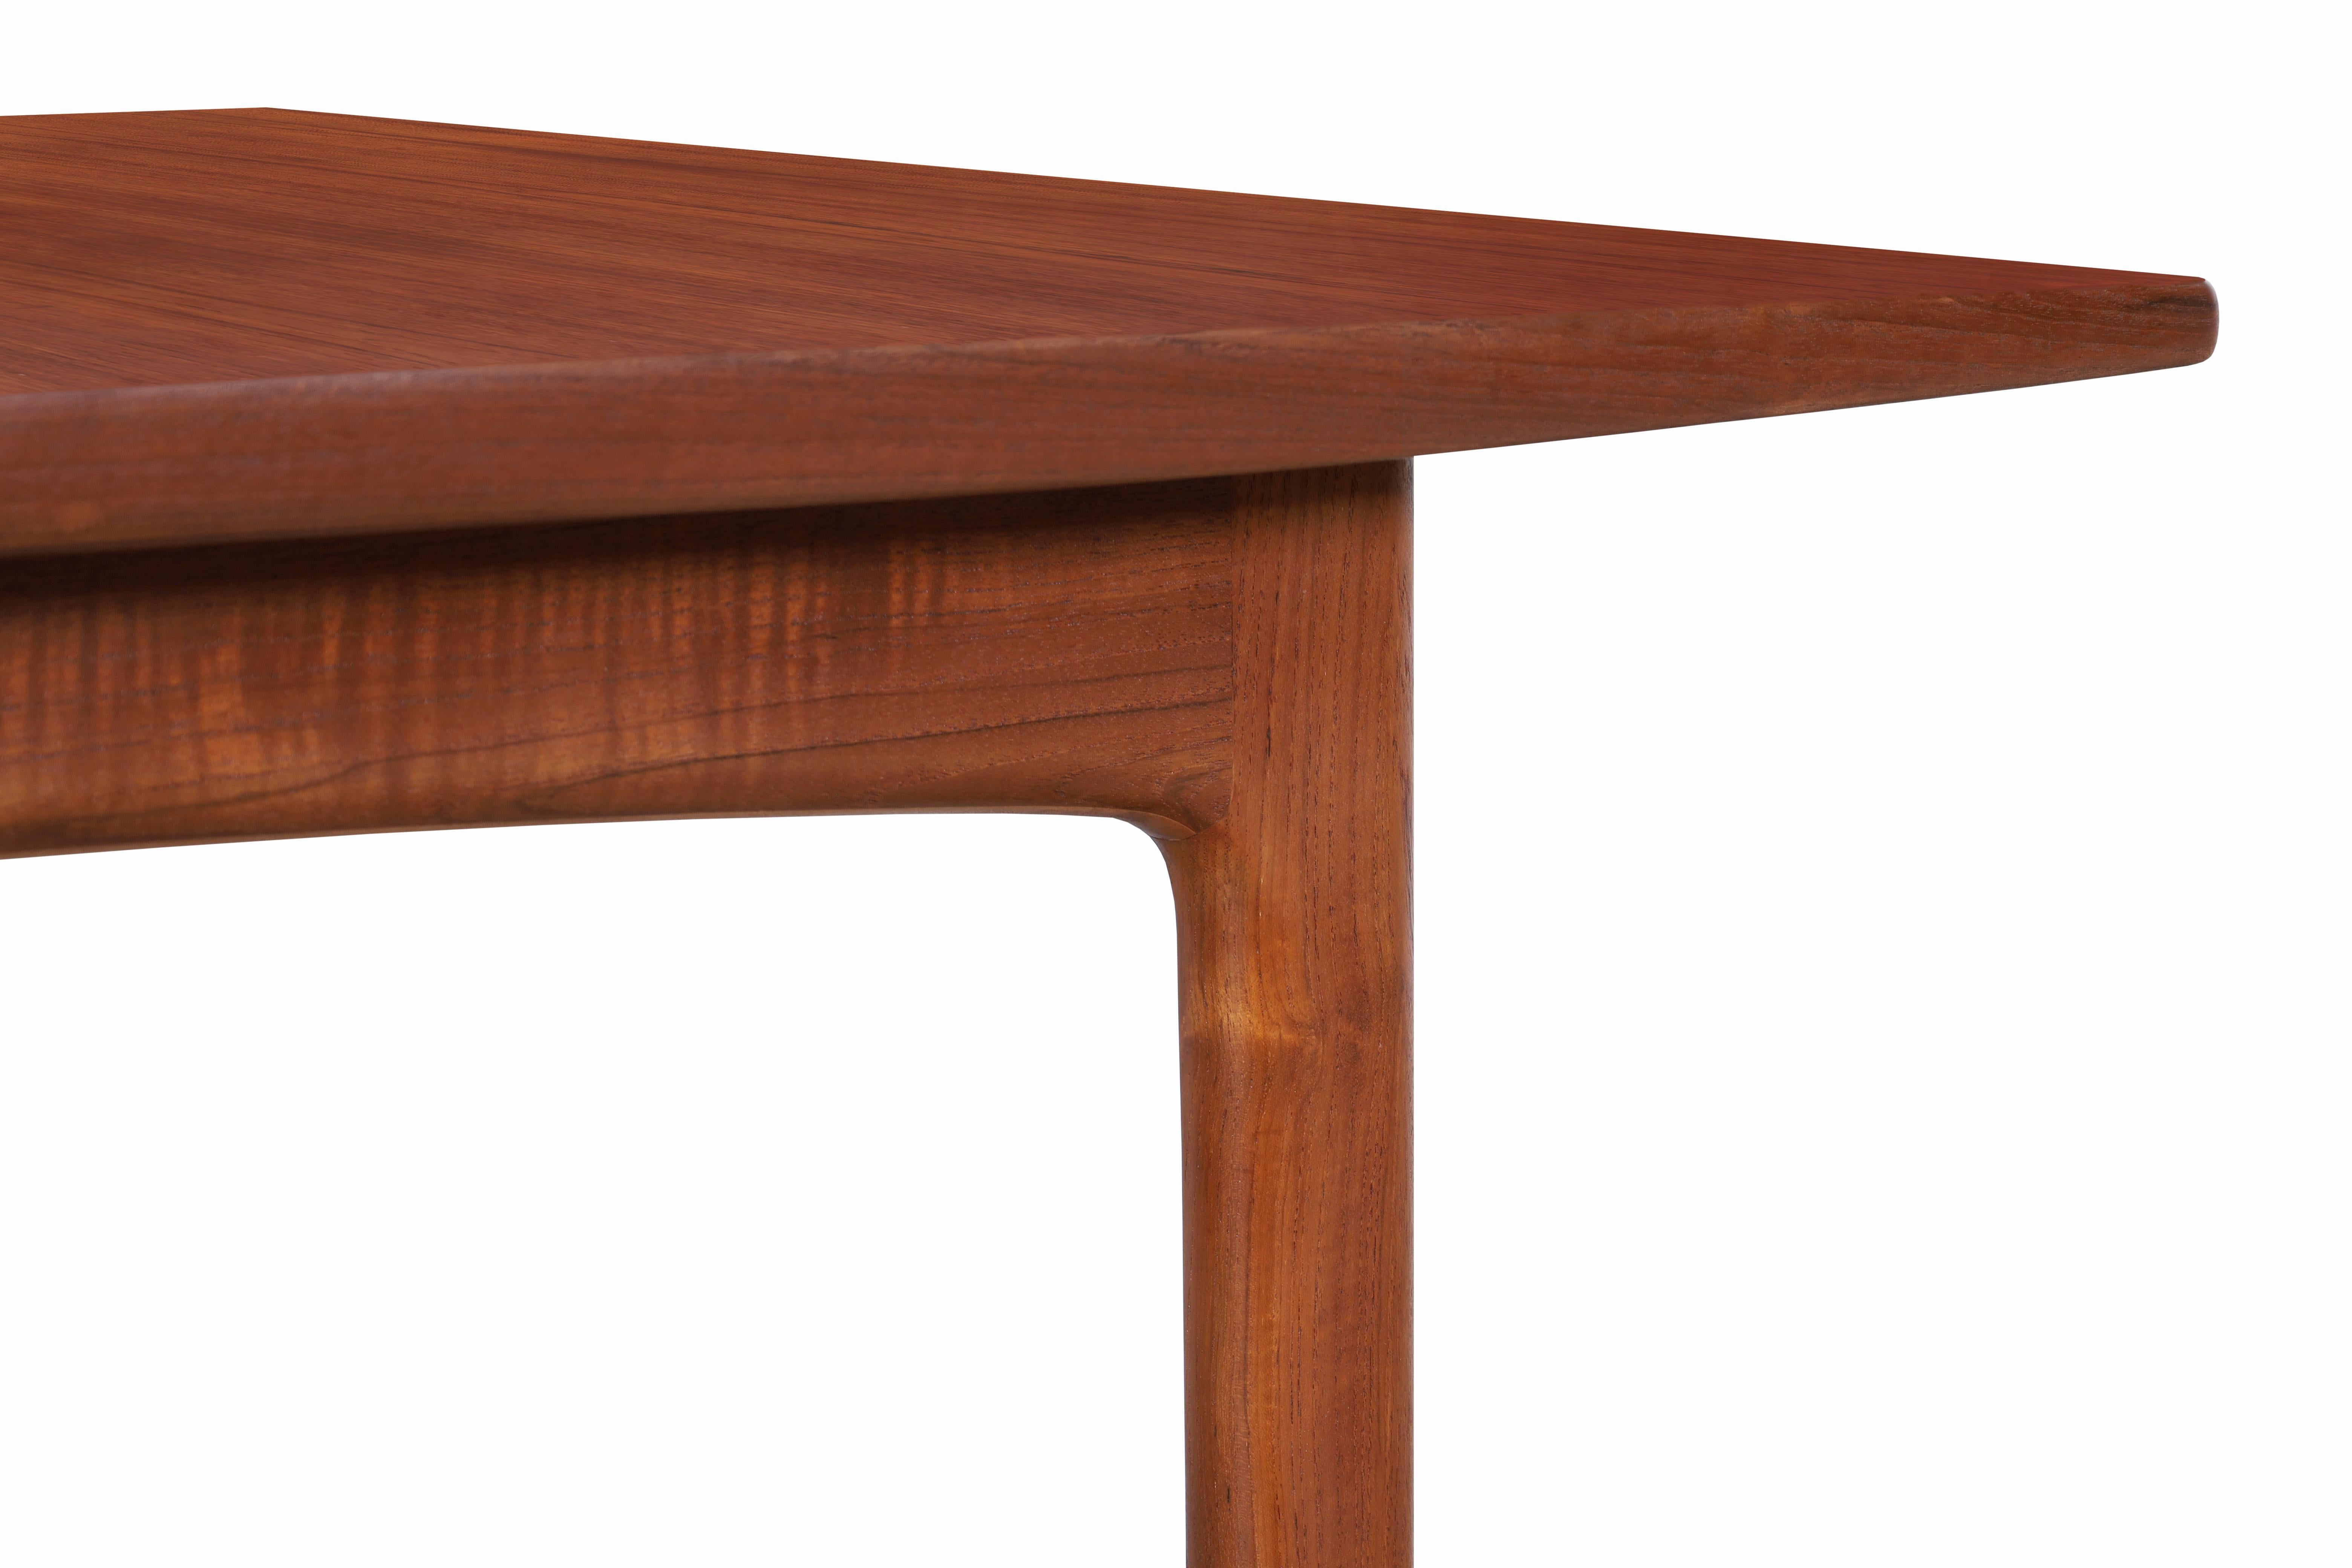 Mid-20th Century Midcentury Teak Expanding Dining Table by Folke Ohlsson for DUX